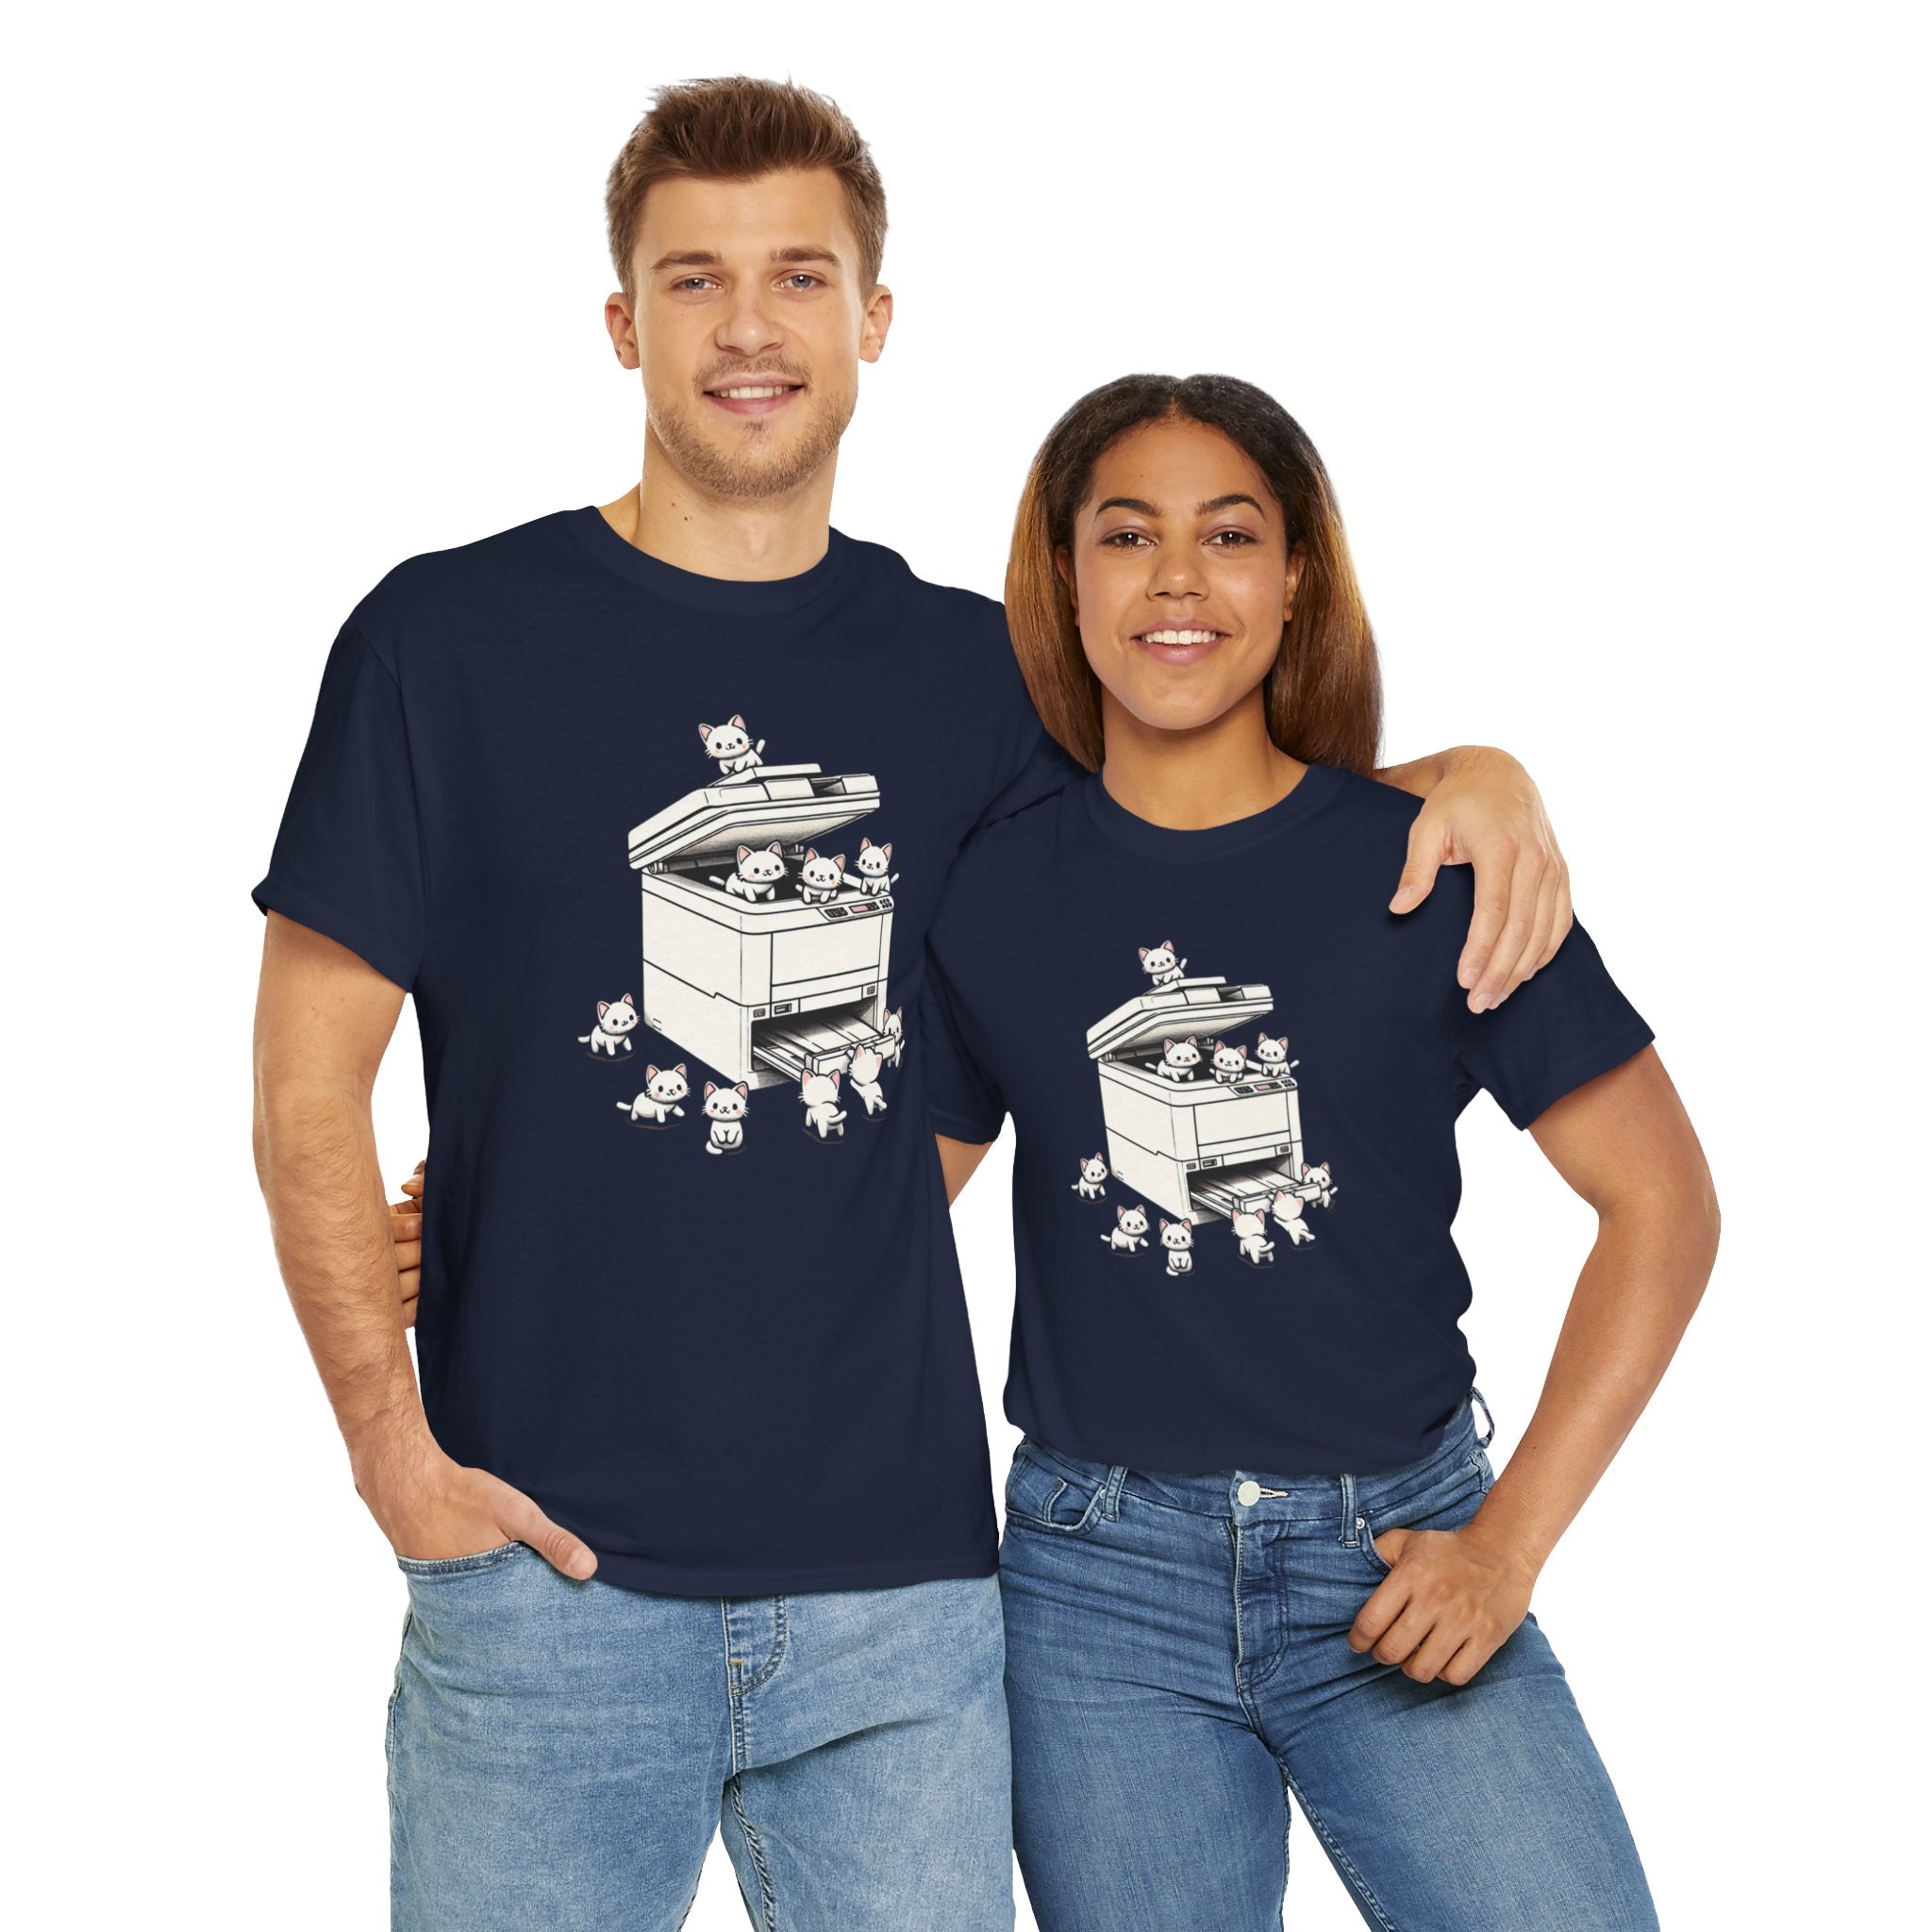 Copy Cats T-Shirt Unisex Heavy Cotton Tee Gift For Him Gift For Her Cute Shirt Couple Birthday Christmas TShirt Photocopier